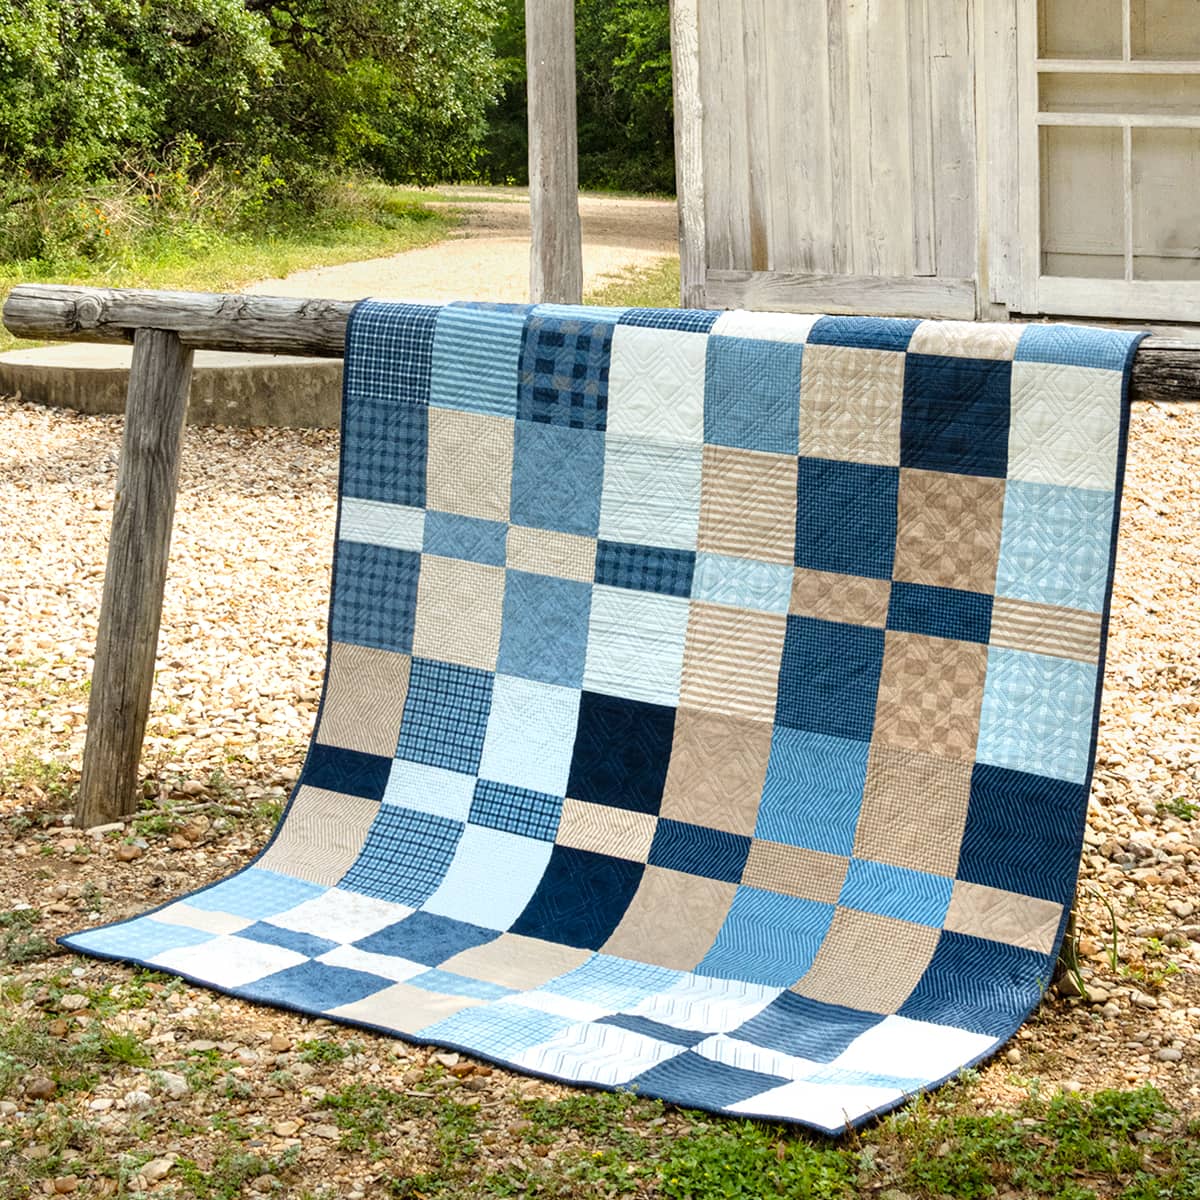 20 gift ideas for quilters - The Crafty Quilter